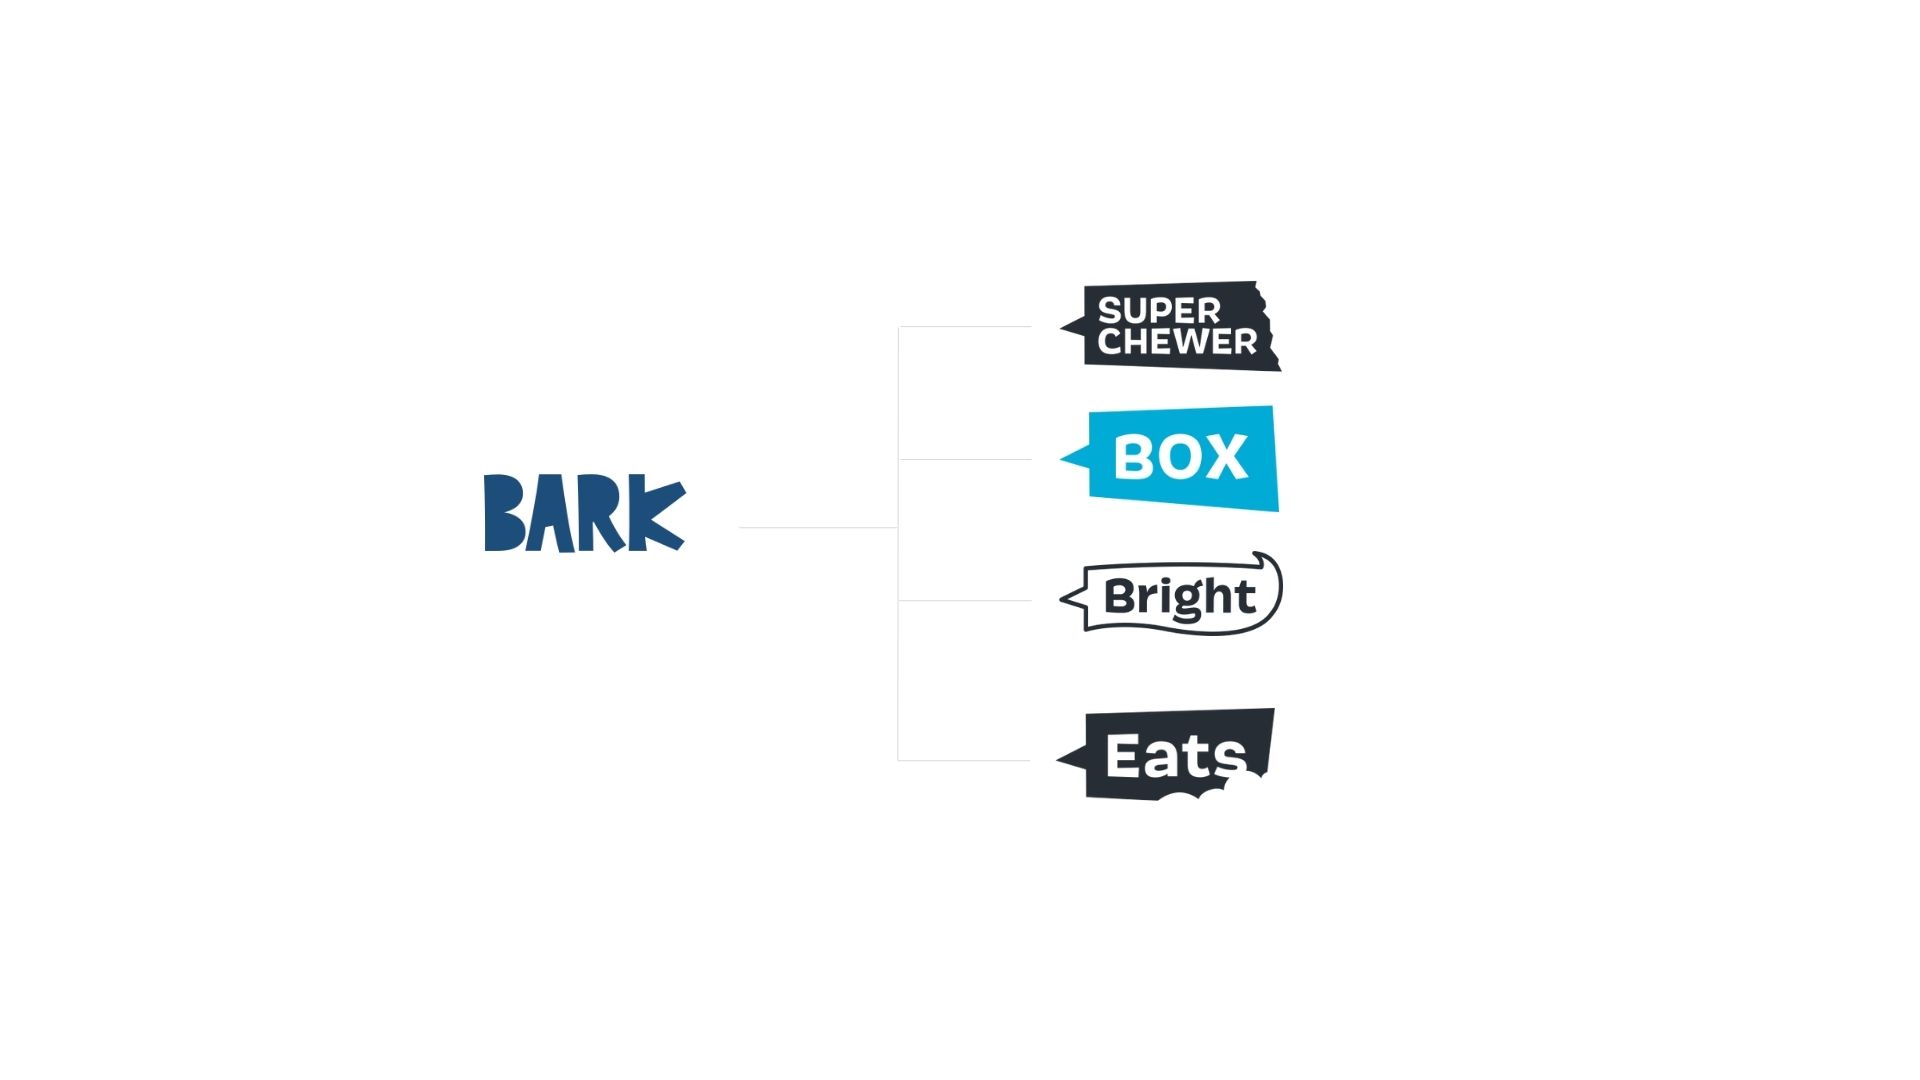 Bark Brand Structure - Dog eCommerce products